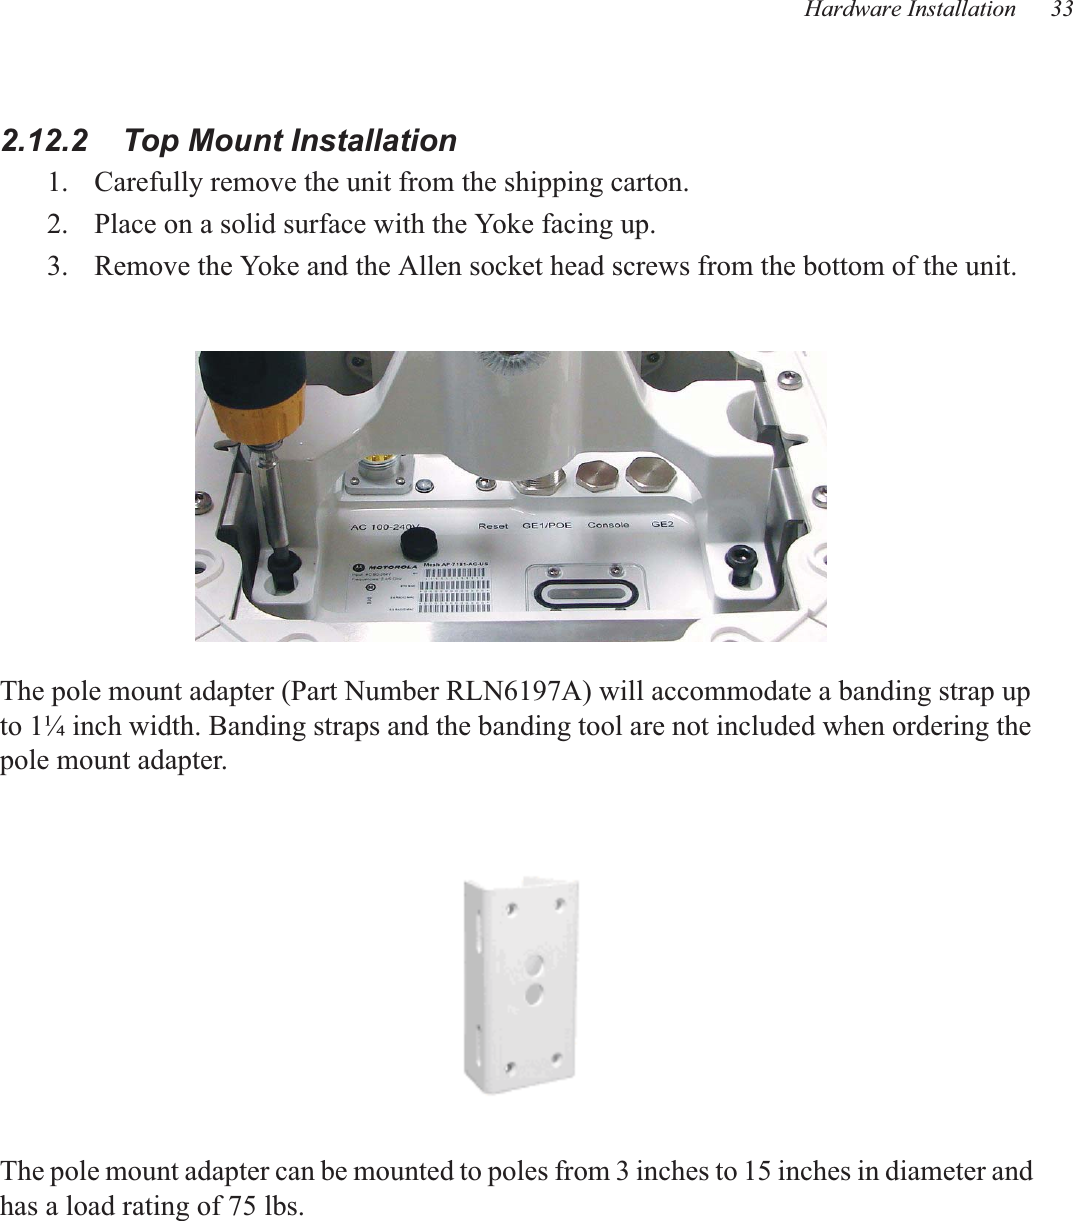 Hardware Installation 332.12.2    Top Mount Installation1. Carefully remove the unit from the shipping carton.2. Place on a solid surface with the Yoke facing up.3. Remove the Yoke and the Allen socket head screws from the bottom of the unit.The pole mount adapter (Part Number RLN6197A) will accommodate a banding strap up to 1¼ inch width. Banding straps and the banding tool are not included when ordering the pole mount adapter.The pole mount adapter can be mounted to poles from 3 inches to 15 inches in diameter and has a load rating of 75 lbs.